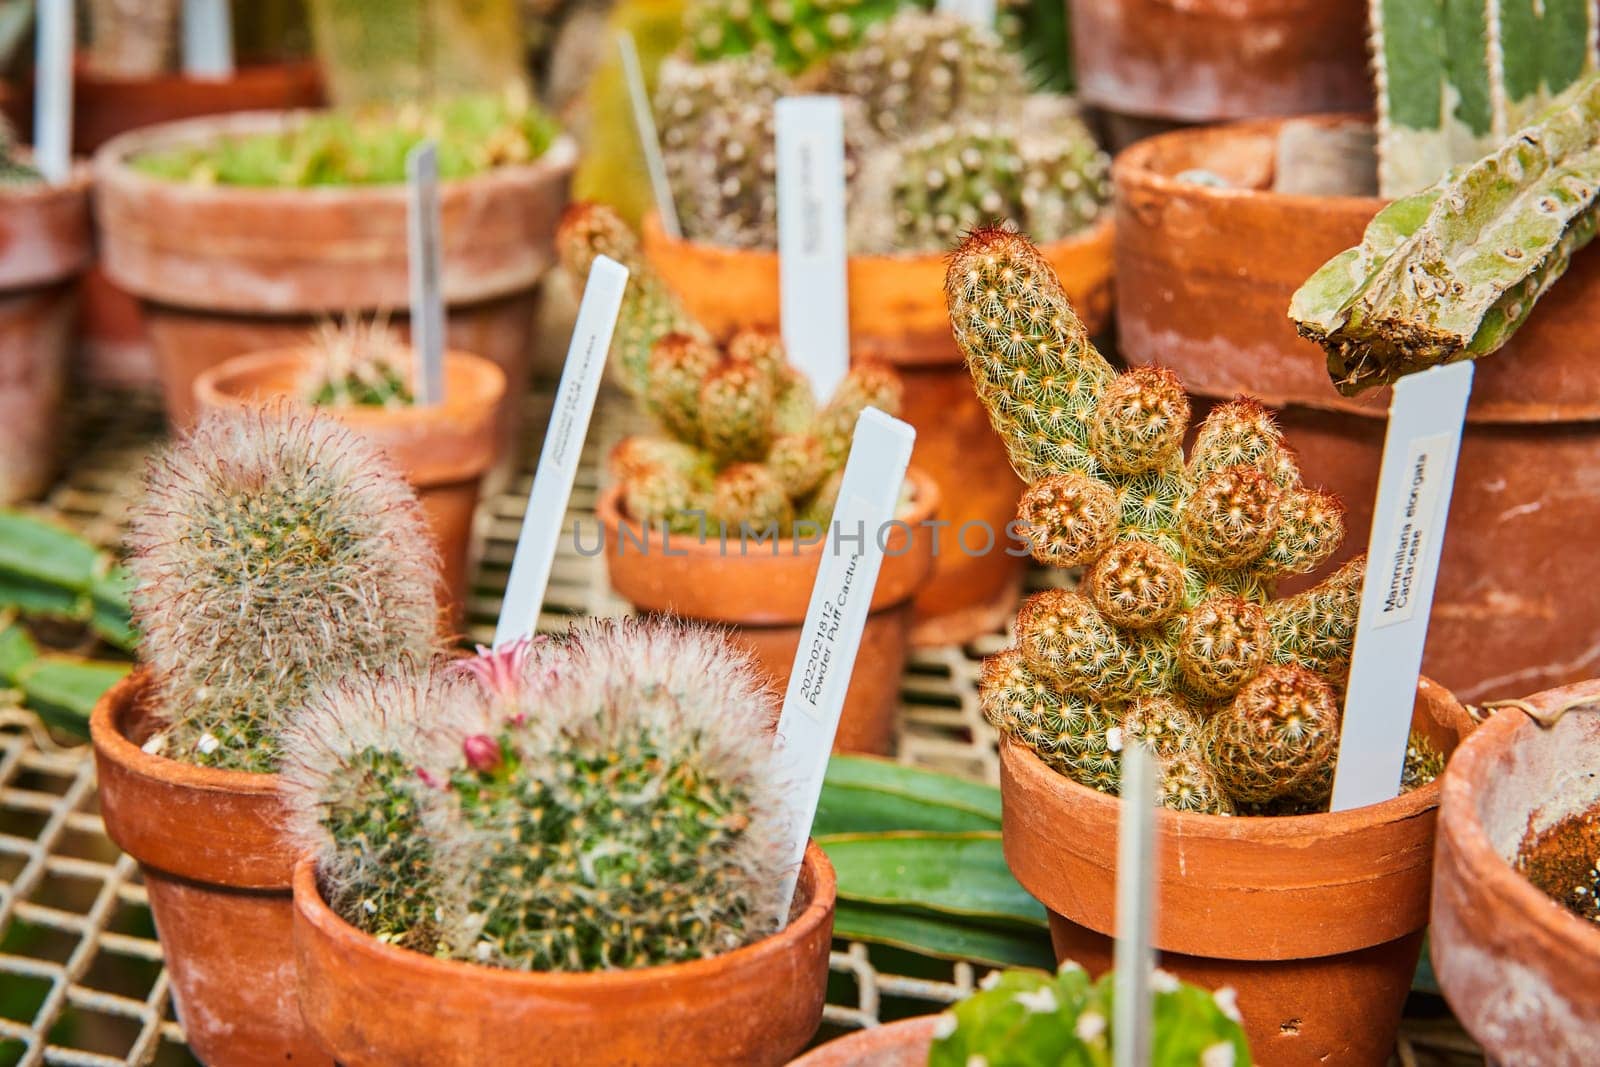 Rustic Cacti Collection in Terracotta Pots with Labels, Eye-Level View by njproductions